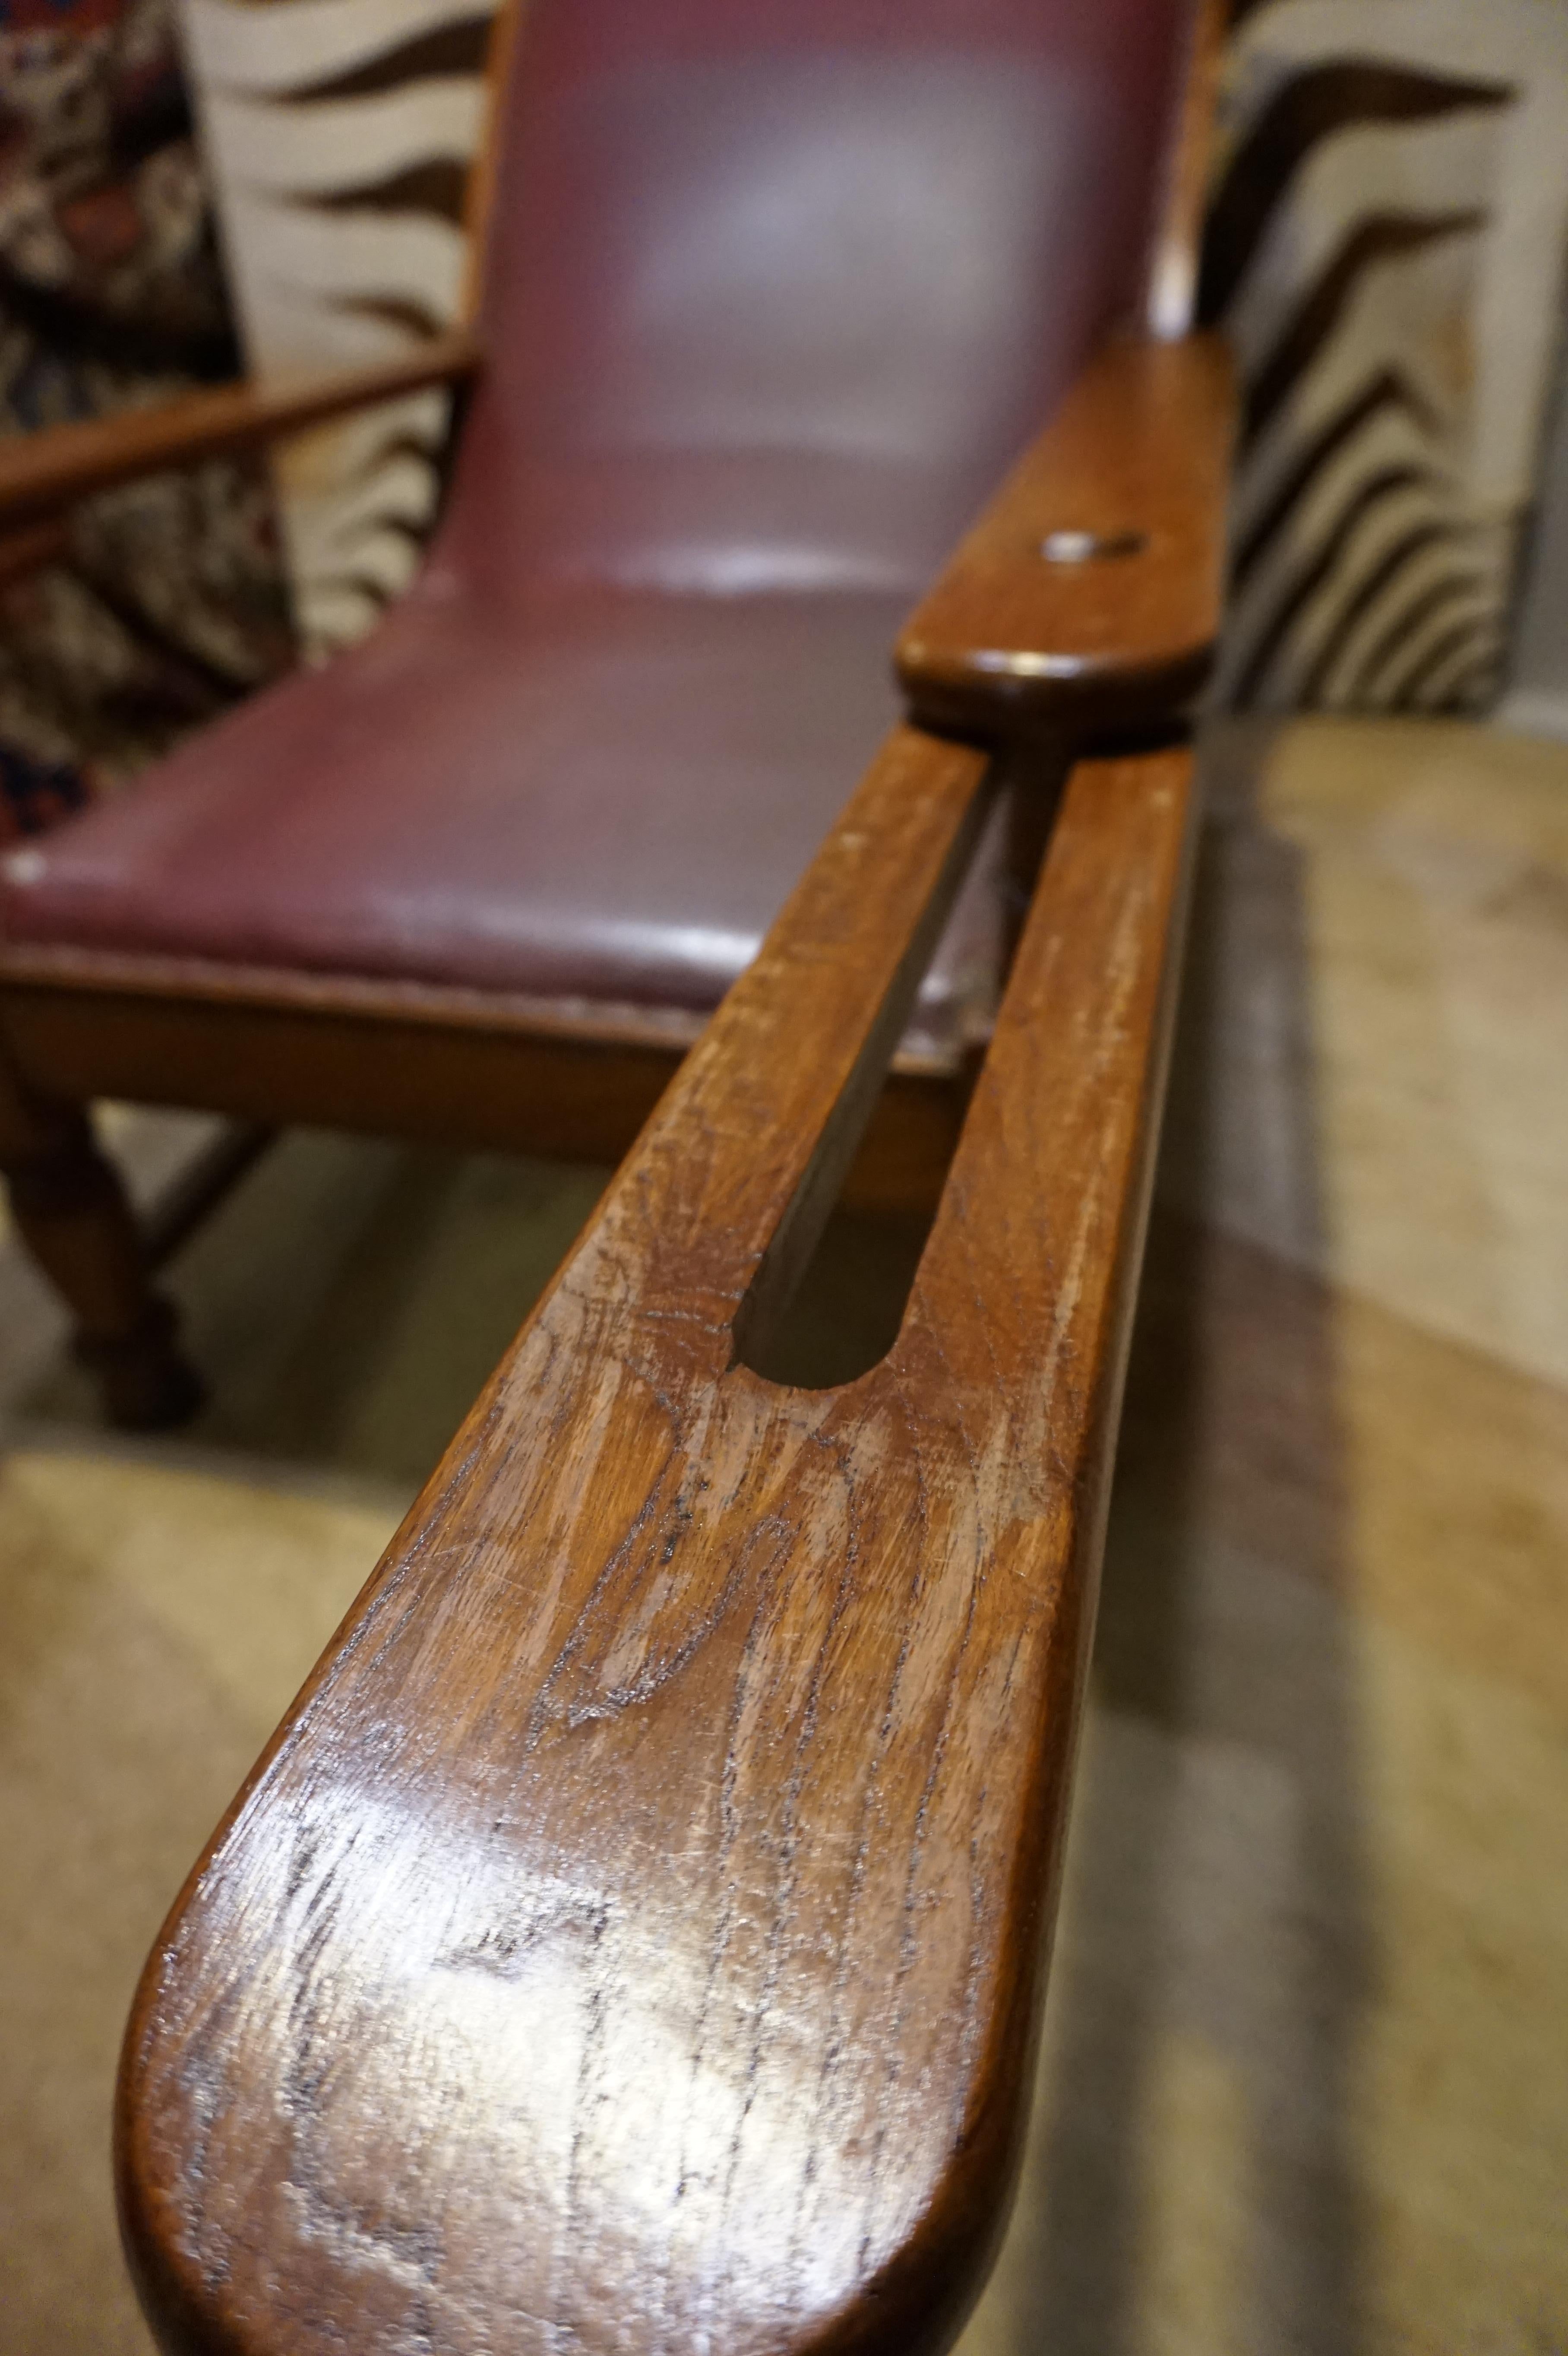 19th Century British Colonial Tea Plantation Teak & Leather Lounge Chair In Good Condition For Sale In Vancouver, British Columbia